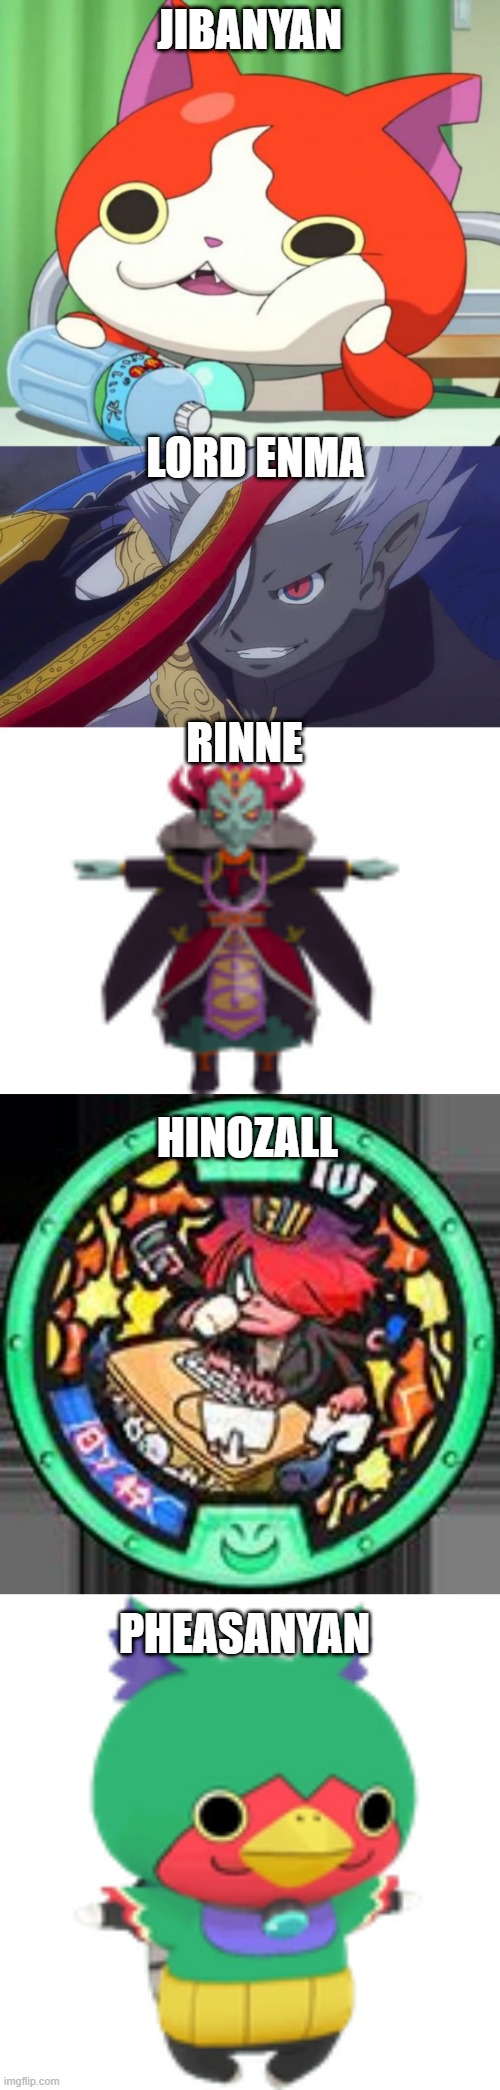 JIBANYAN PHEASANYAN LORD ENMA RINNE HINOZALL | image tagged in interested jibanyan,hinozall medal,truly i'm on a whole other level,t-pose god rinne,pheasanyan t-pose | made w/ Imgflip meme maker